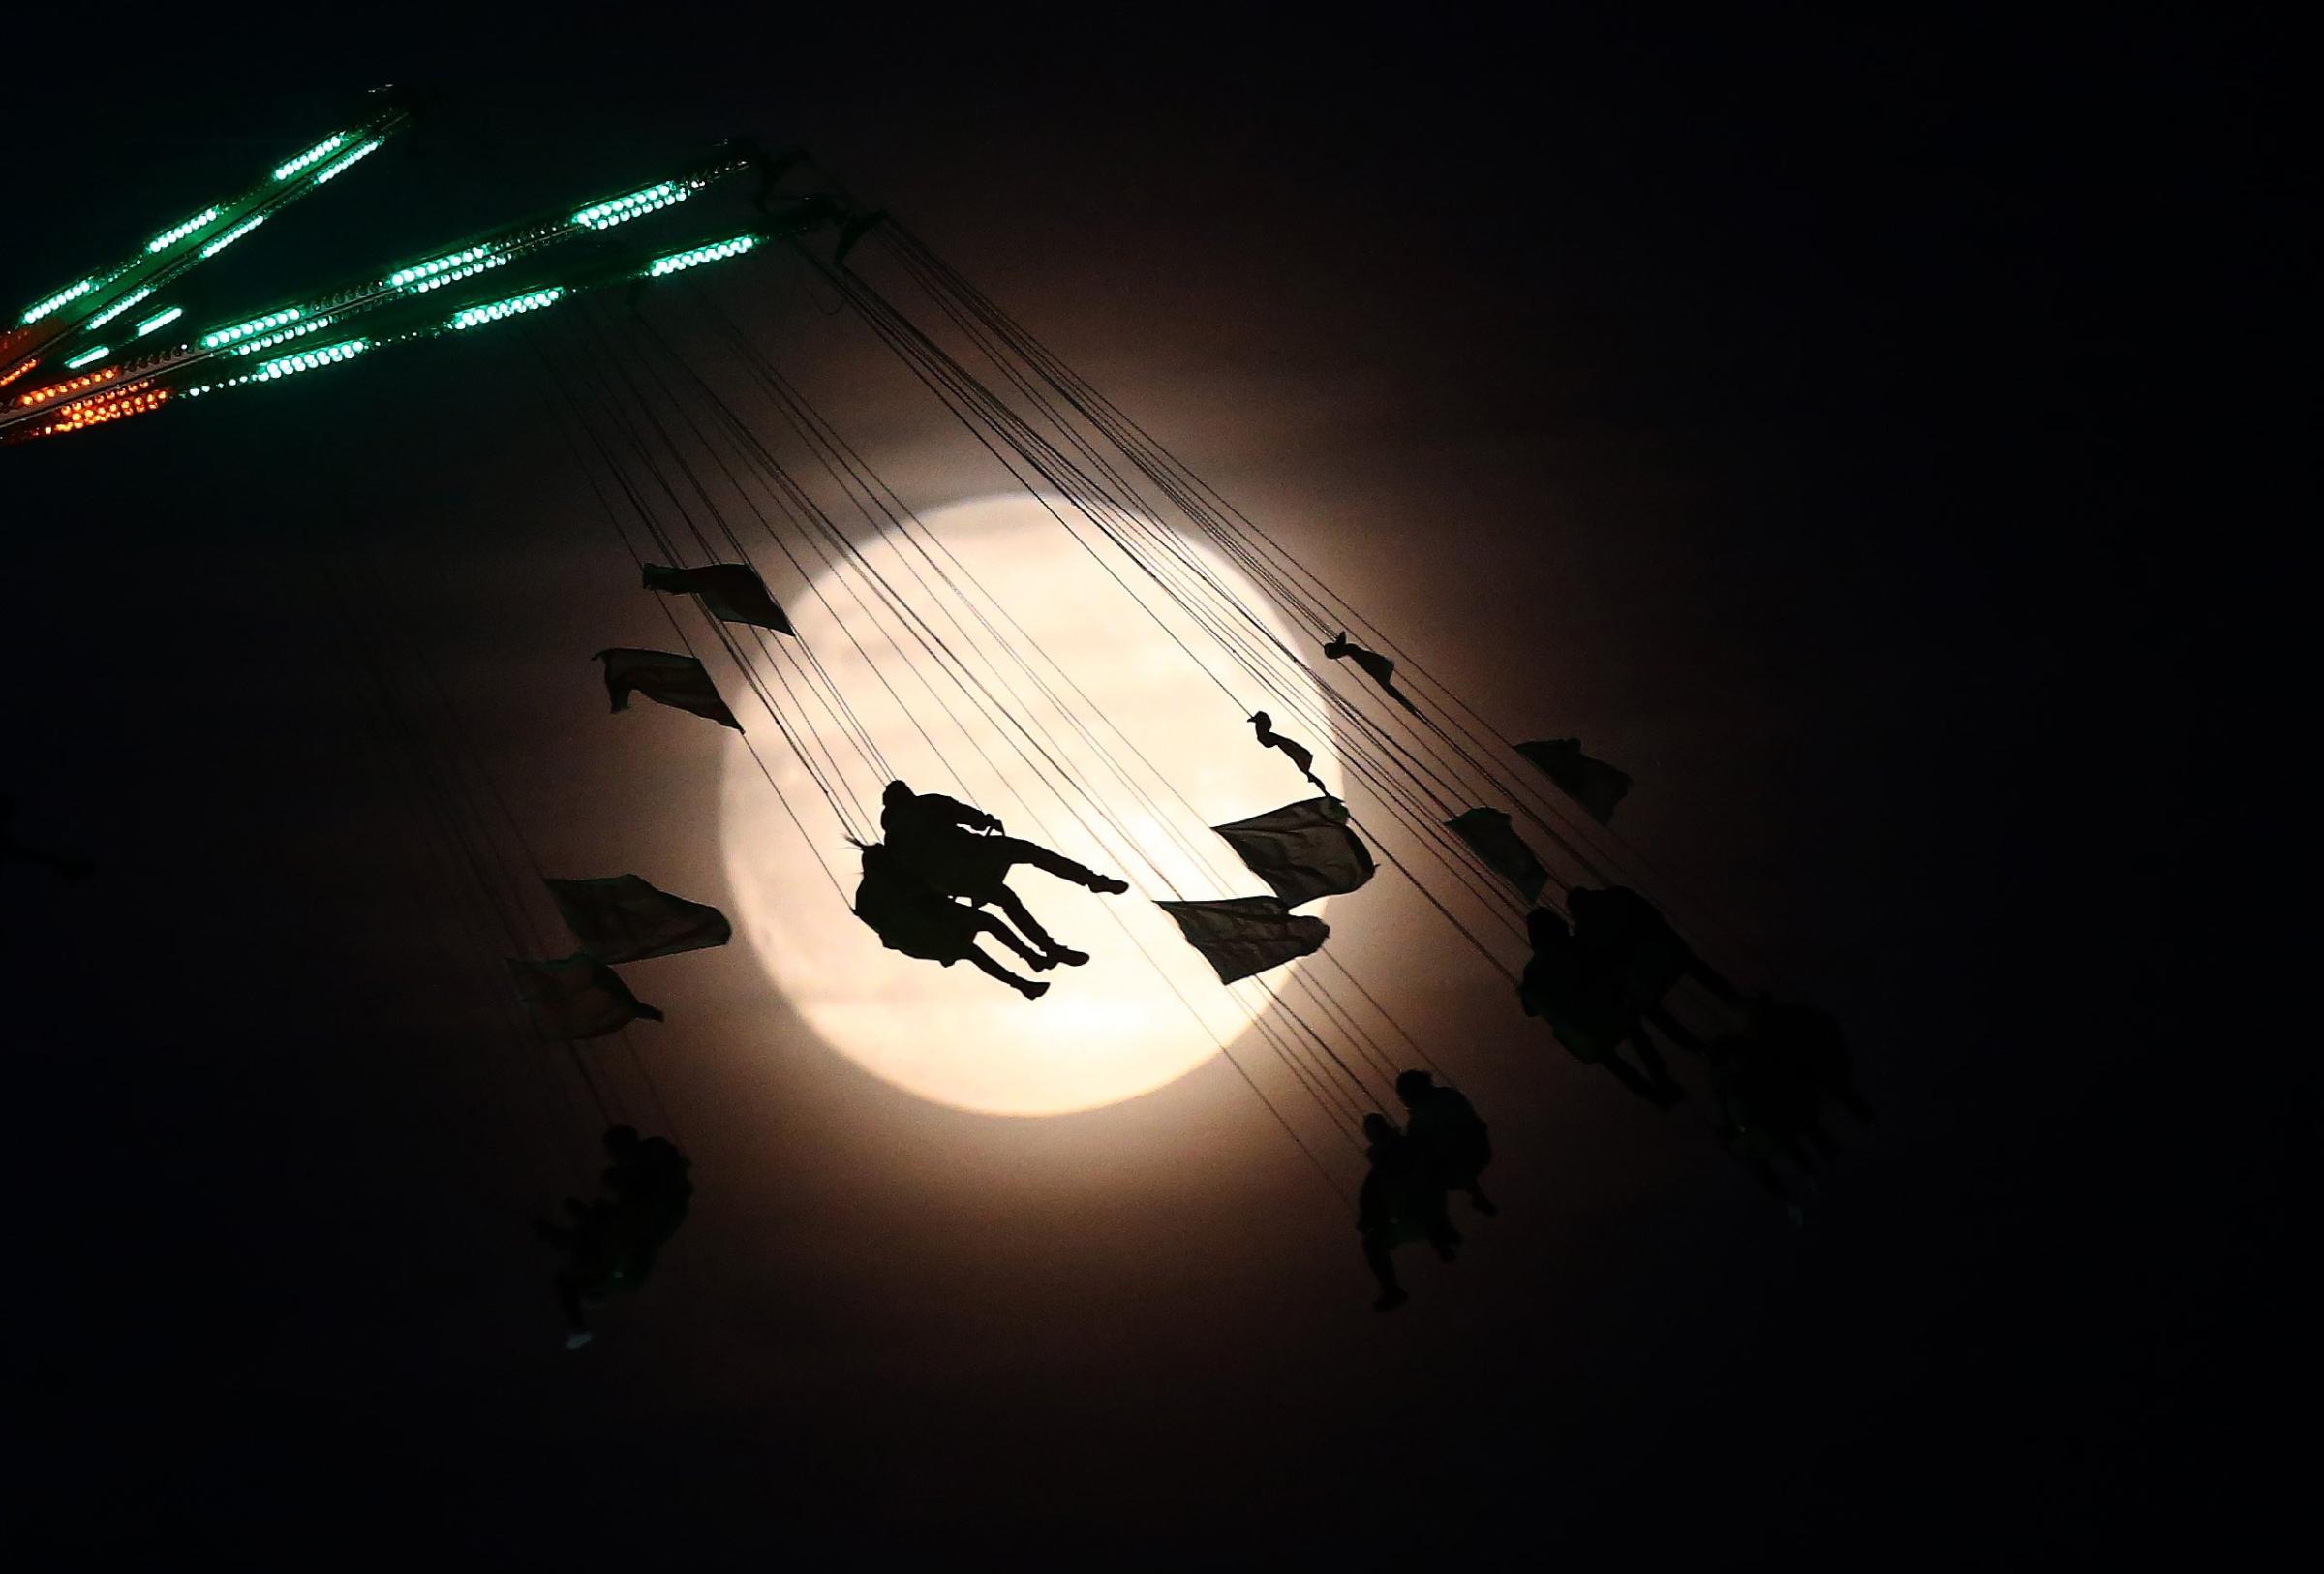 People on a funfair ride are silhouetted against the moon a day before the "supermoon" spectacle, in London